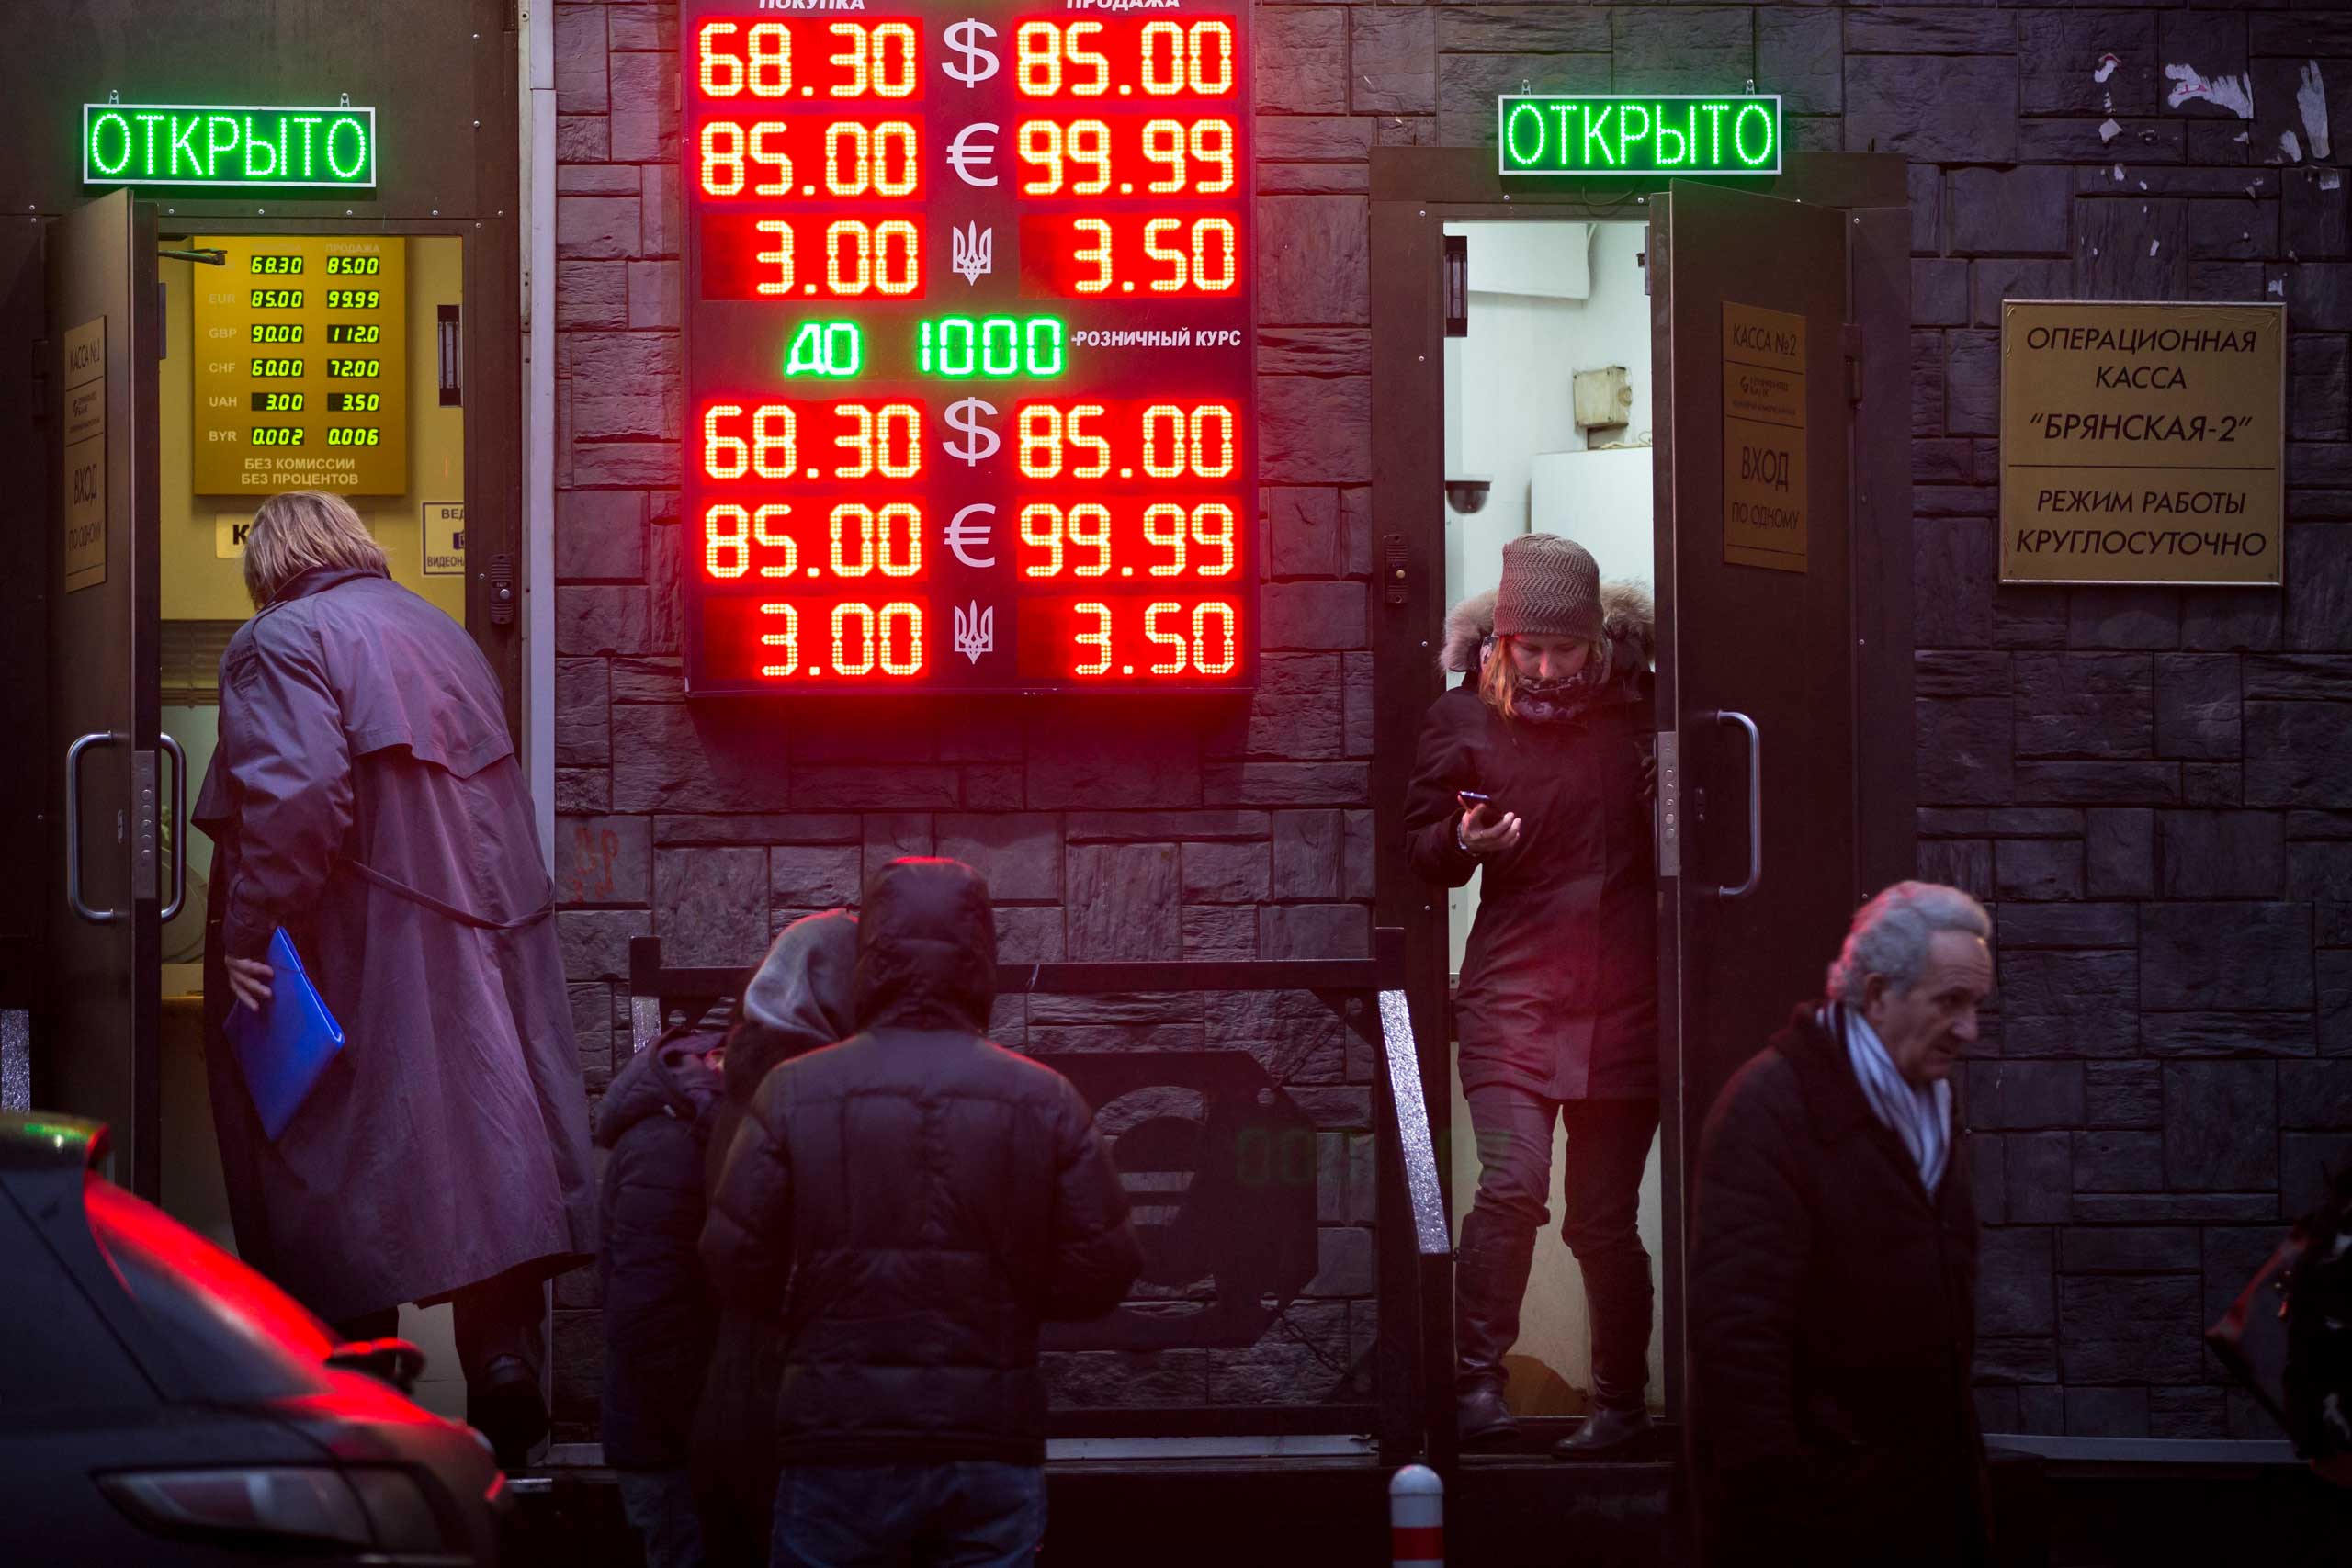 People wait to exchange their currency as  signs advertise the exchange rates at a currency  exchange office in Moscow, Dec. 16, 2014. (Alexander Zemlianichenko—AP)